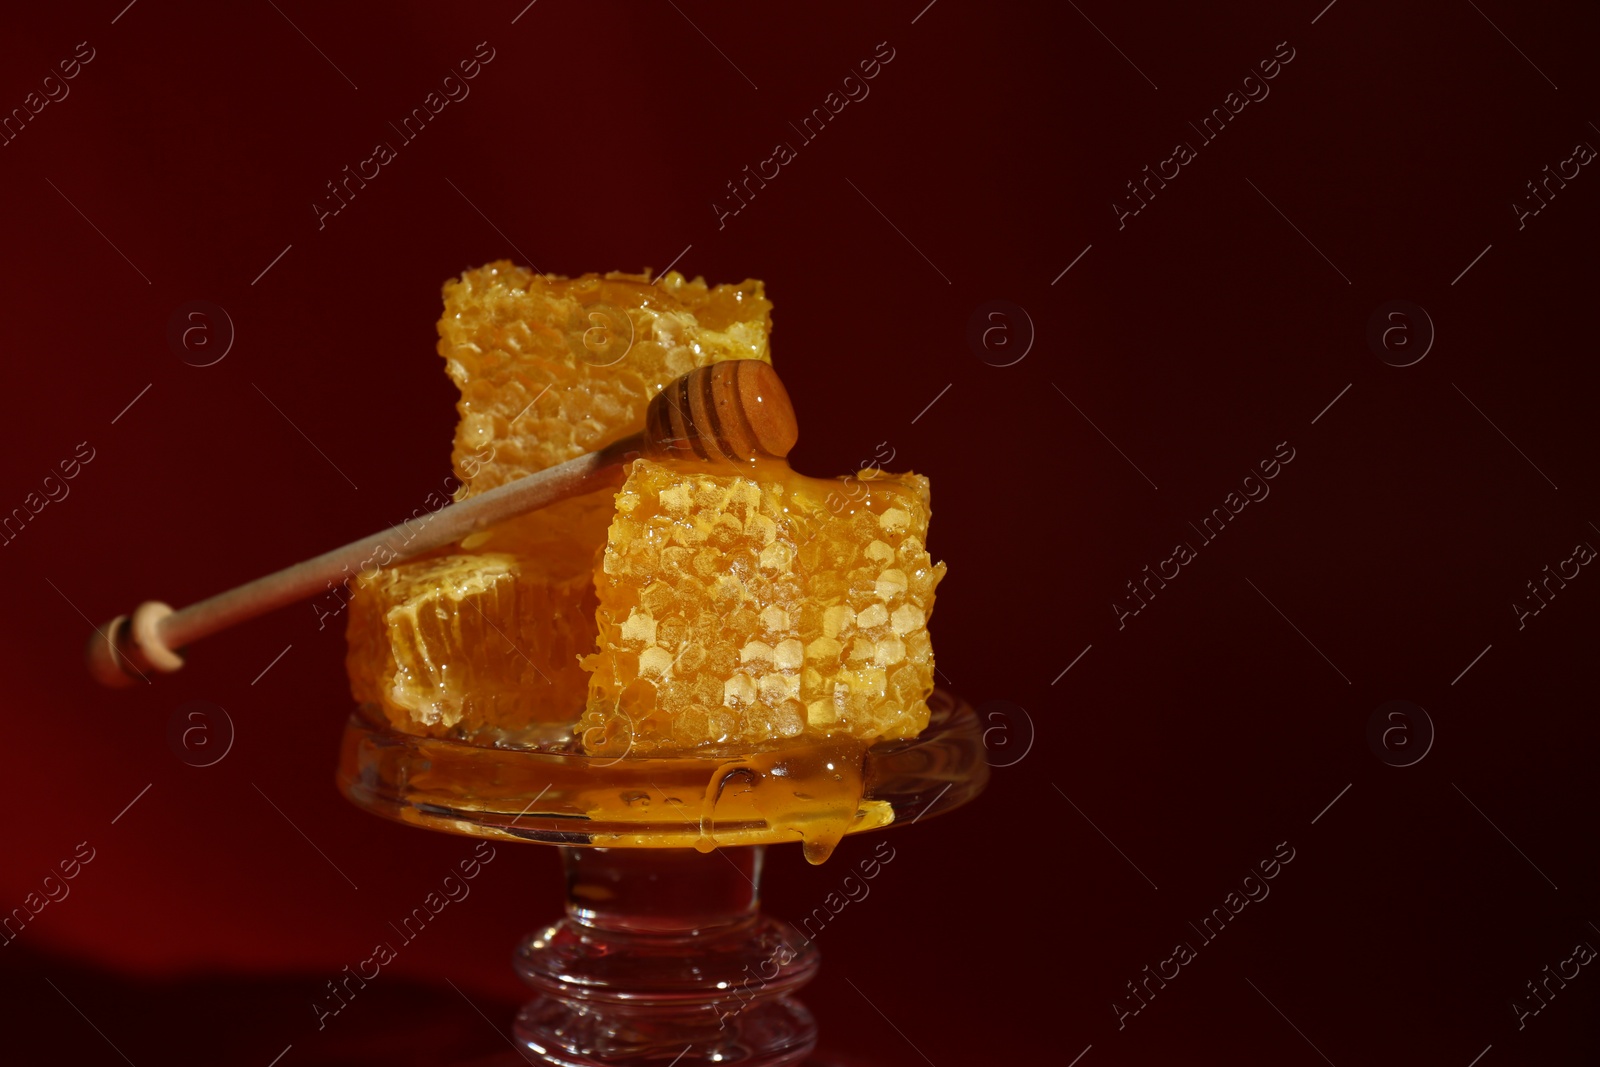 Photo of Natural honeycombs and wooden dipper on glass stand against burgundy background, space for text